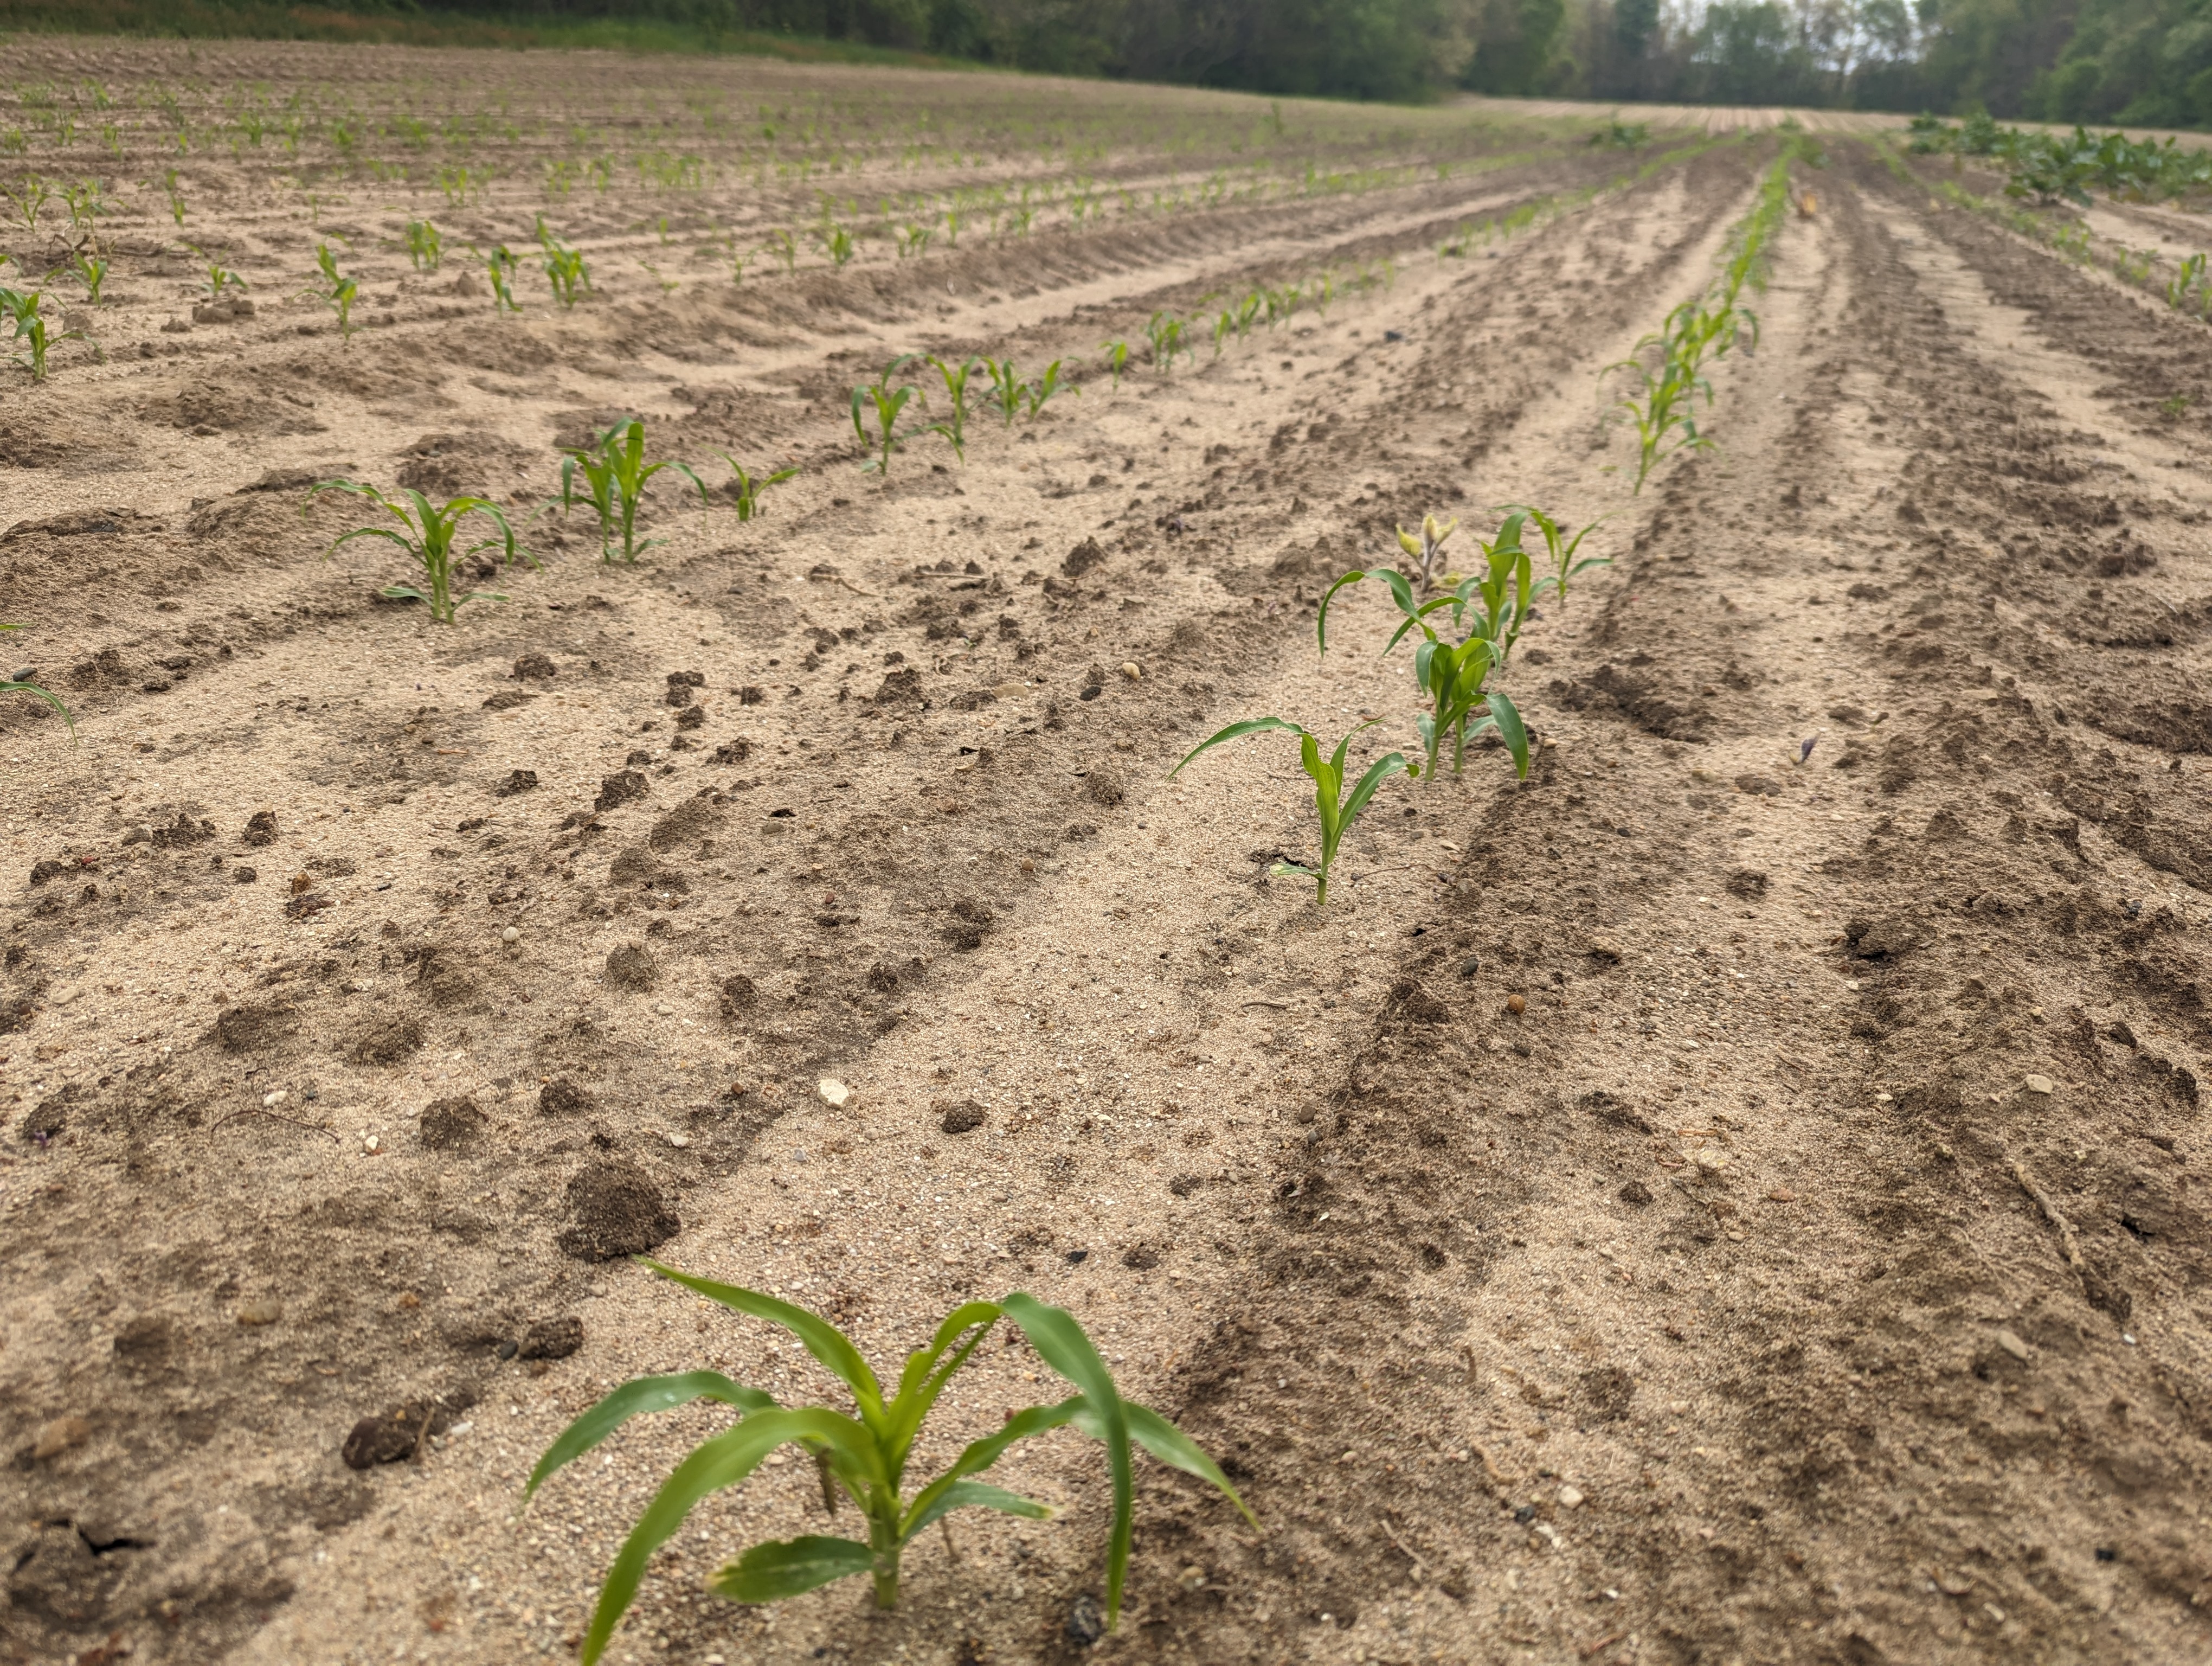 Sweet corn emerging from the ground.